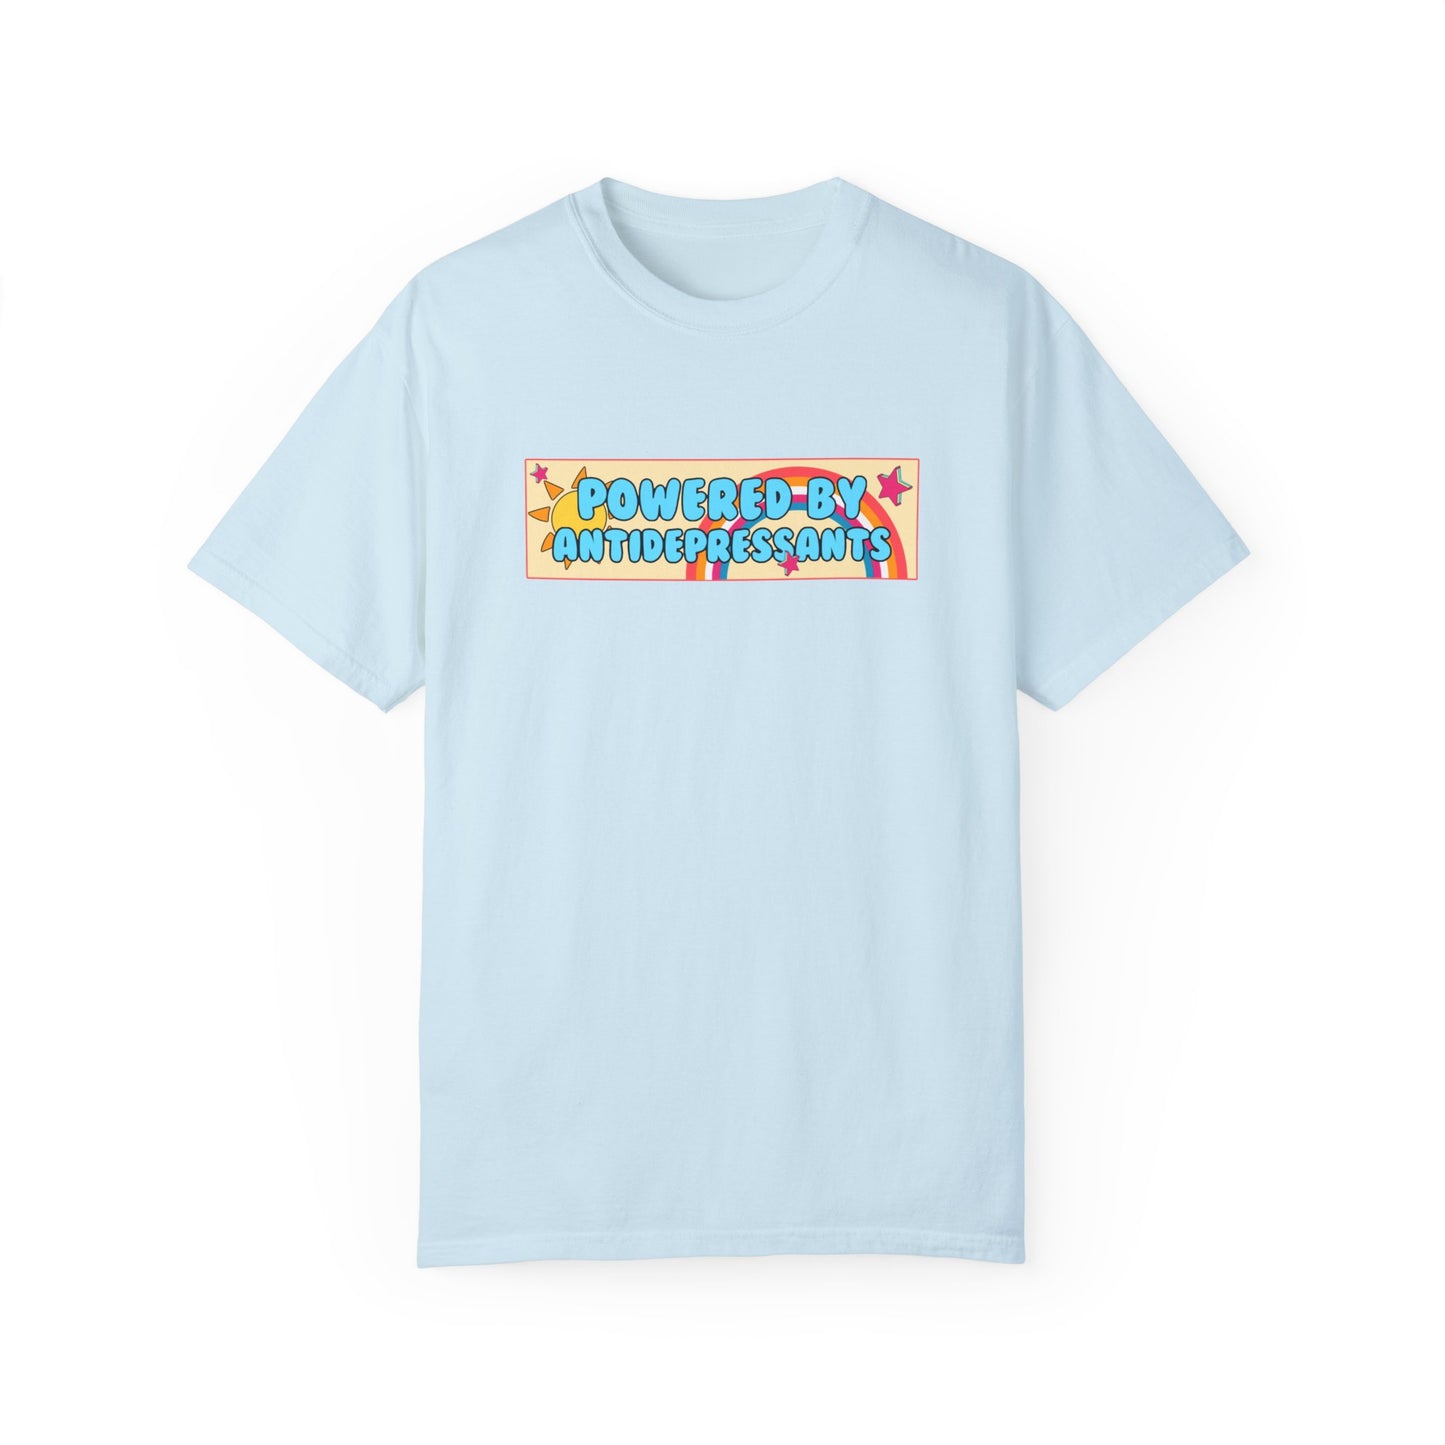 Powered By Antidepressants Comfort Colors Tshirt